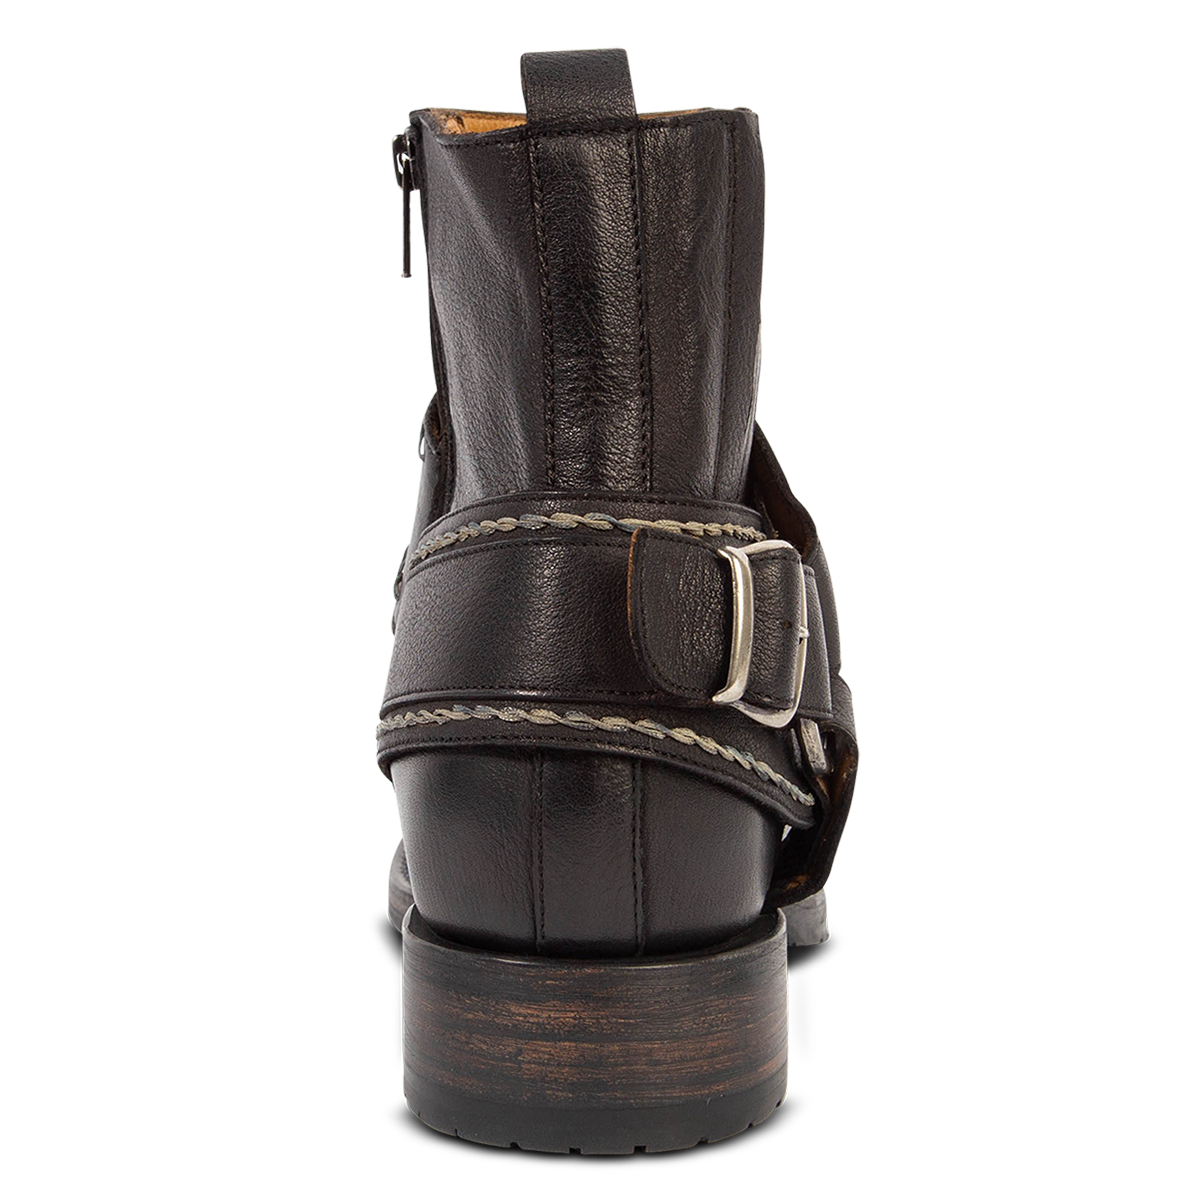 Back view showing a leather ankle harness strap, low heel and inside working brass zipper on FREEBIRD men's Dallas black leather boot 